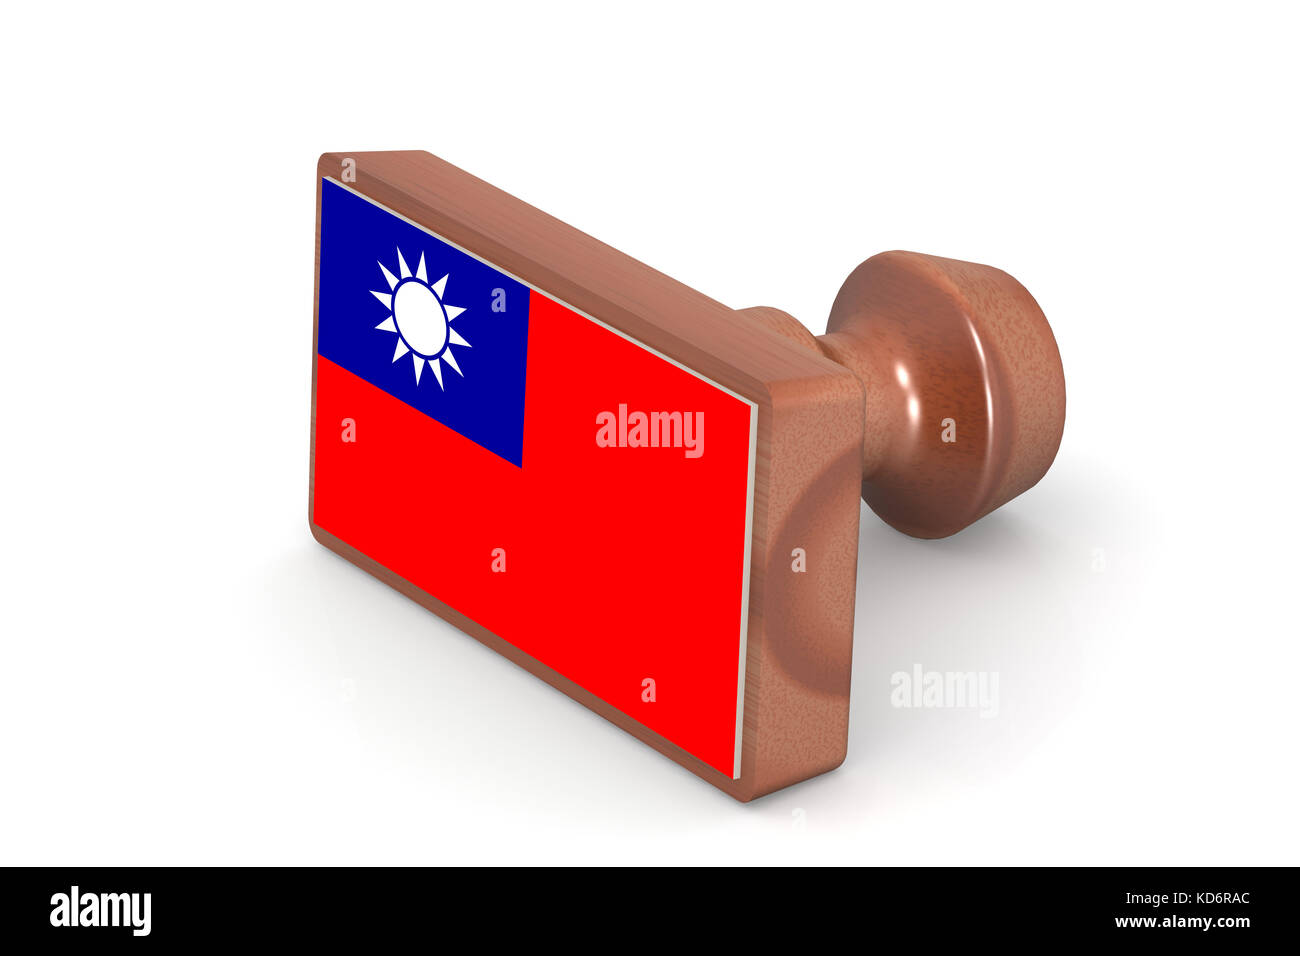 Wooden stamp with Republic of China flag image with hi-res rendered artwork that could be used for any graphic design. Stock Photo